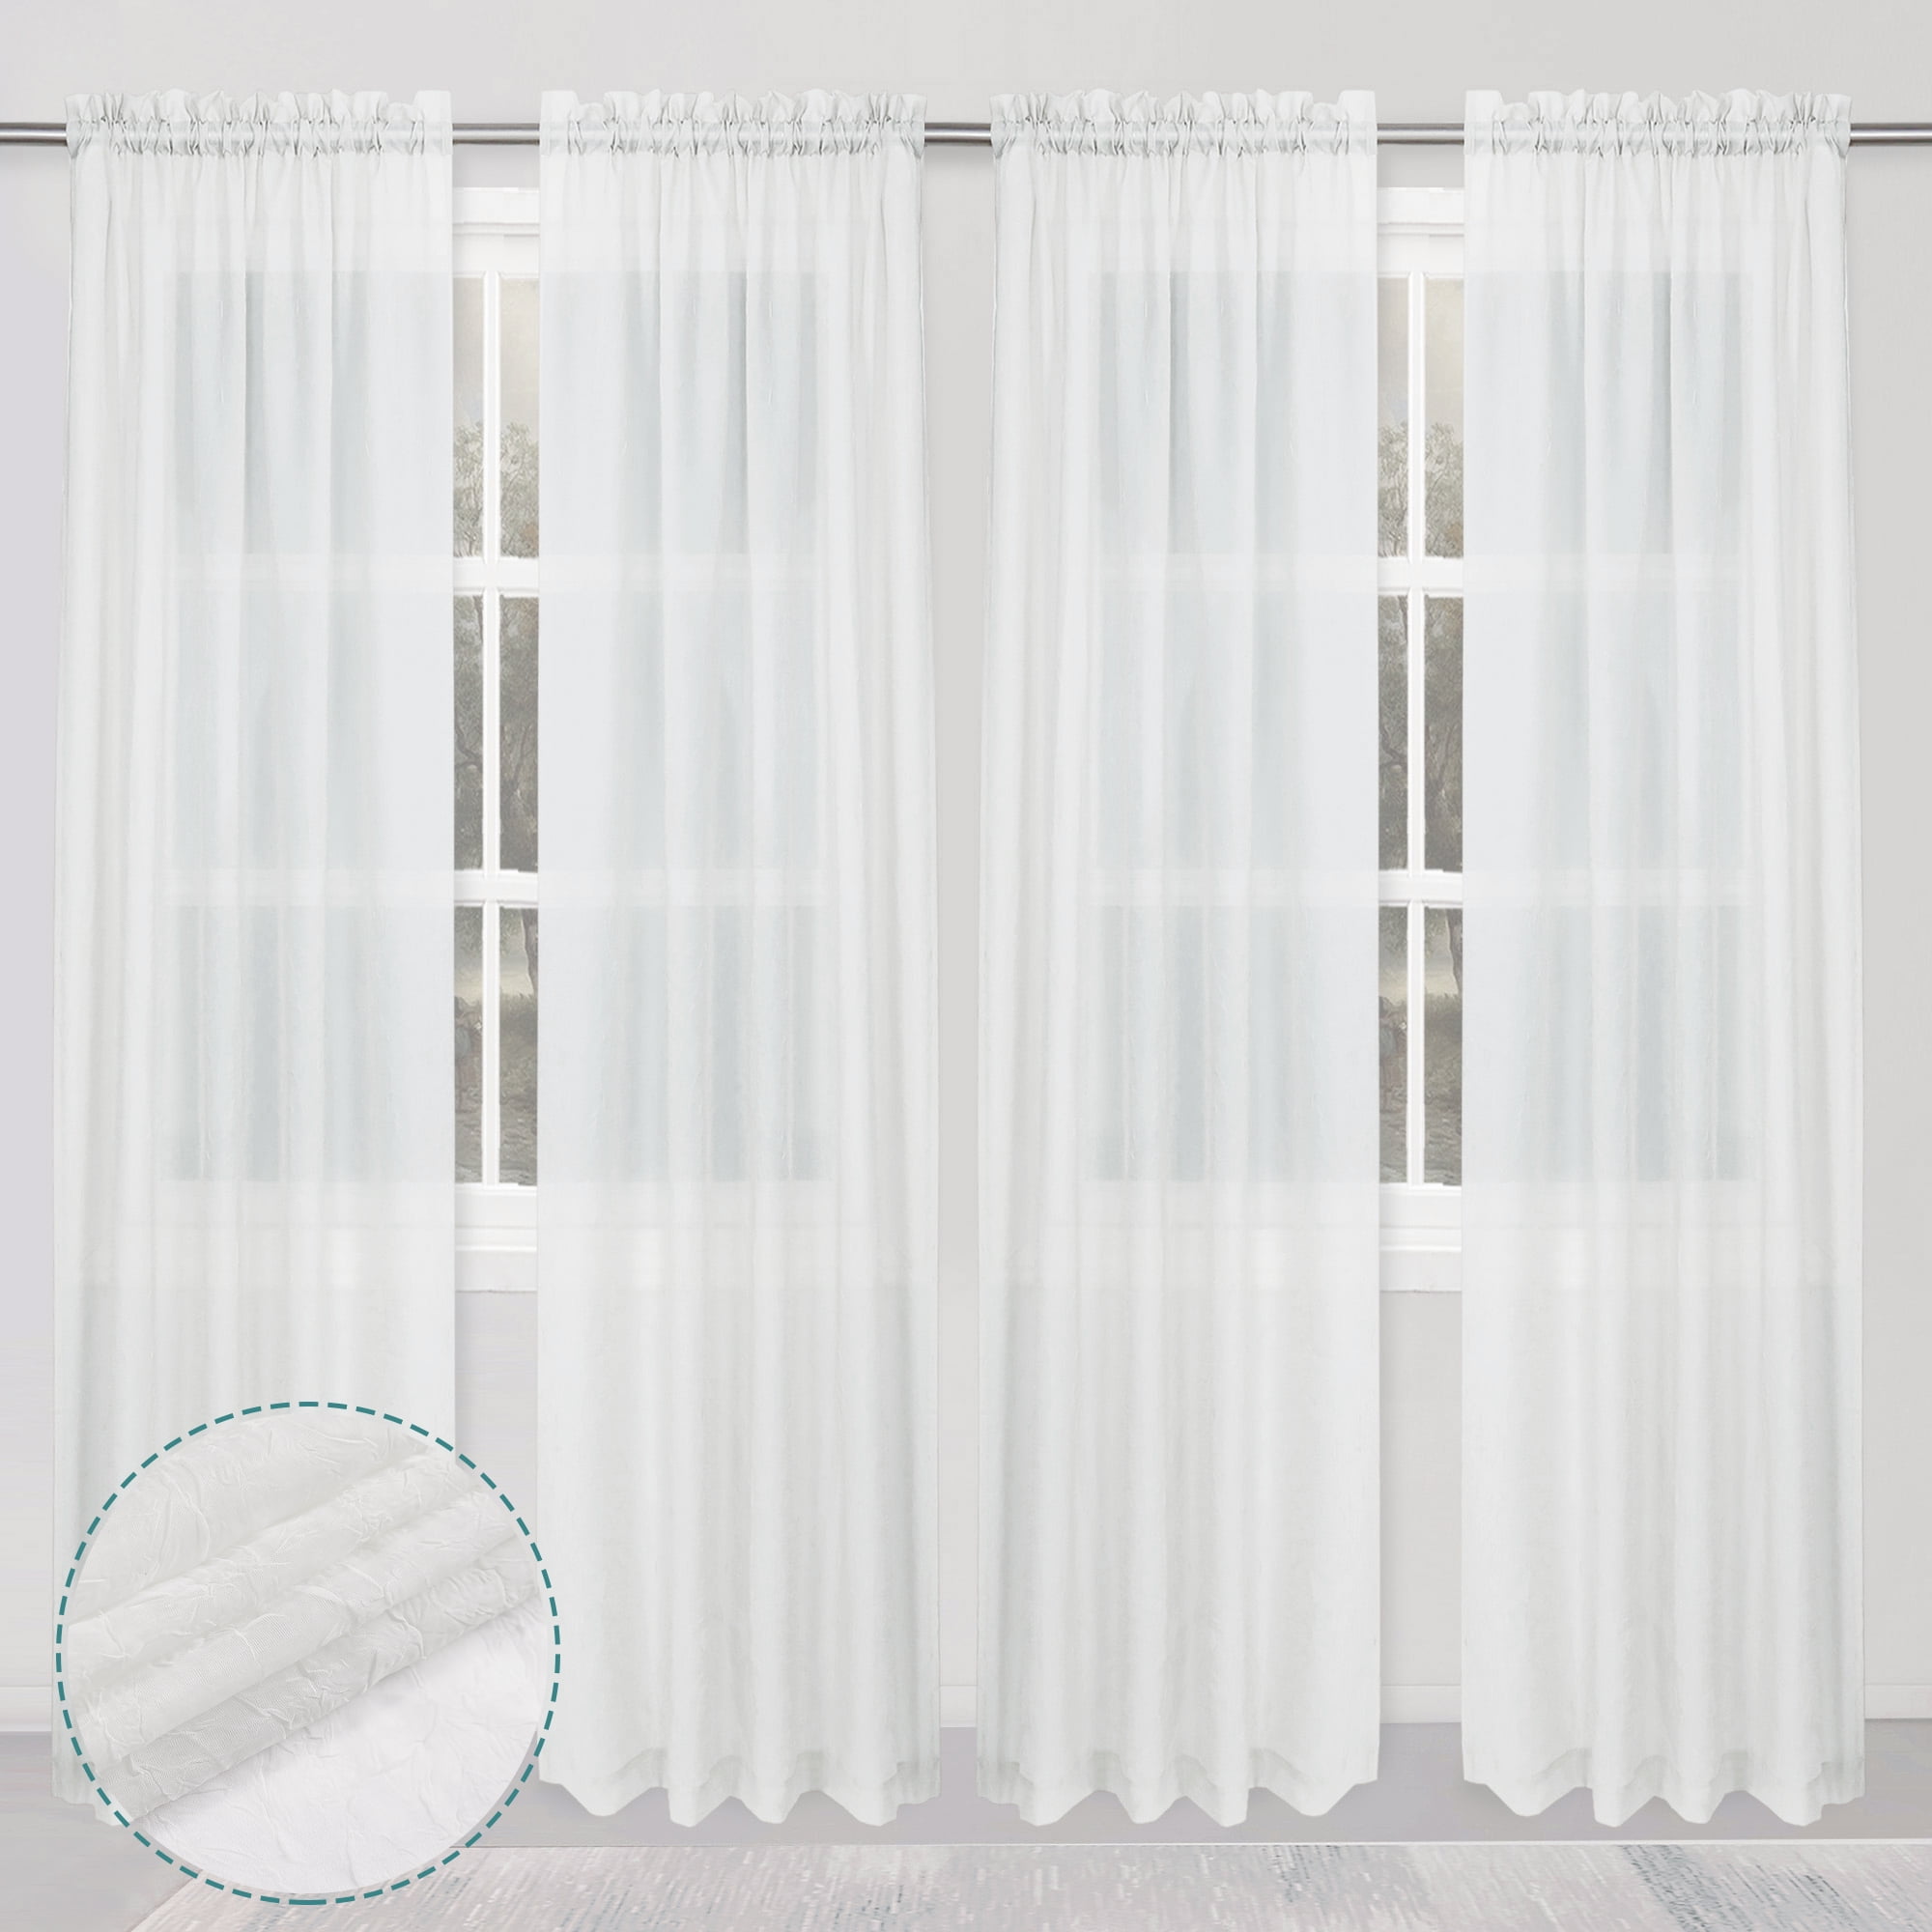 OVZME Olivia White Curtains Crushed Textured Sheer 4PACK Light ...